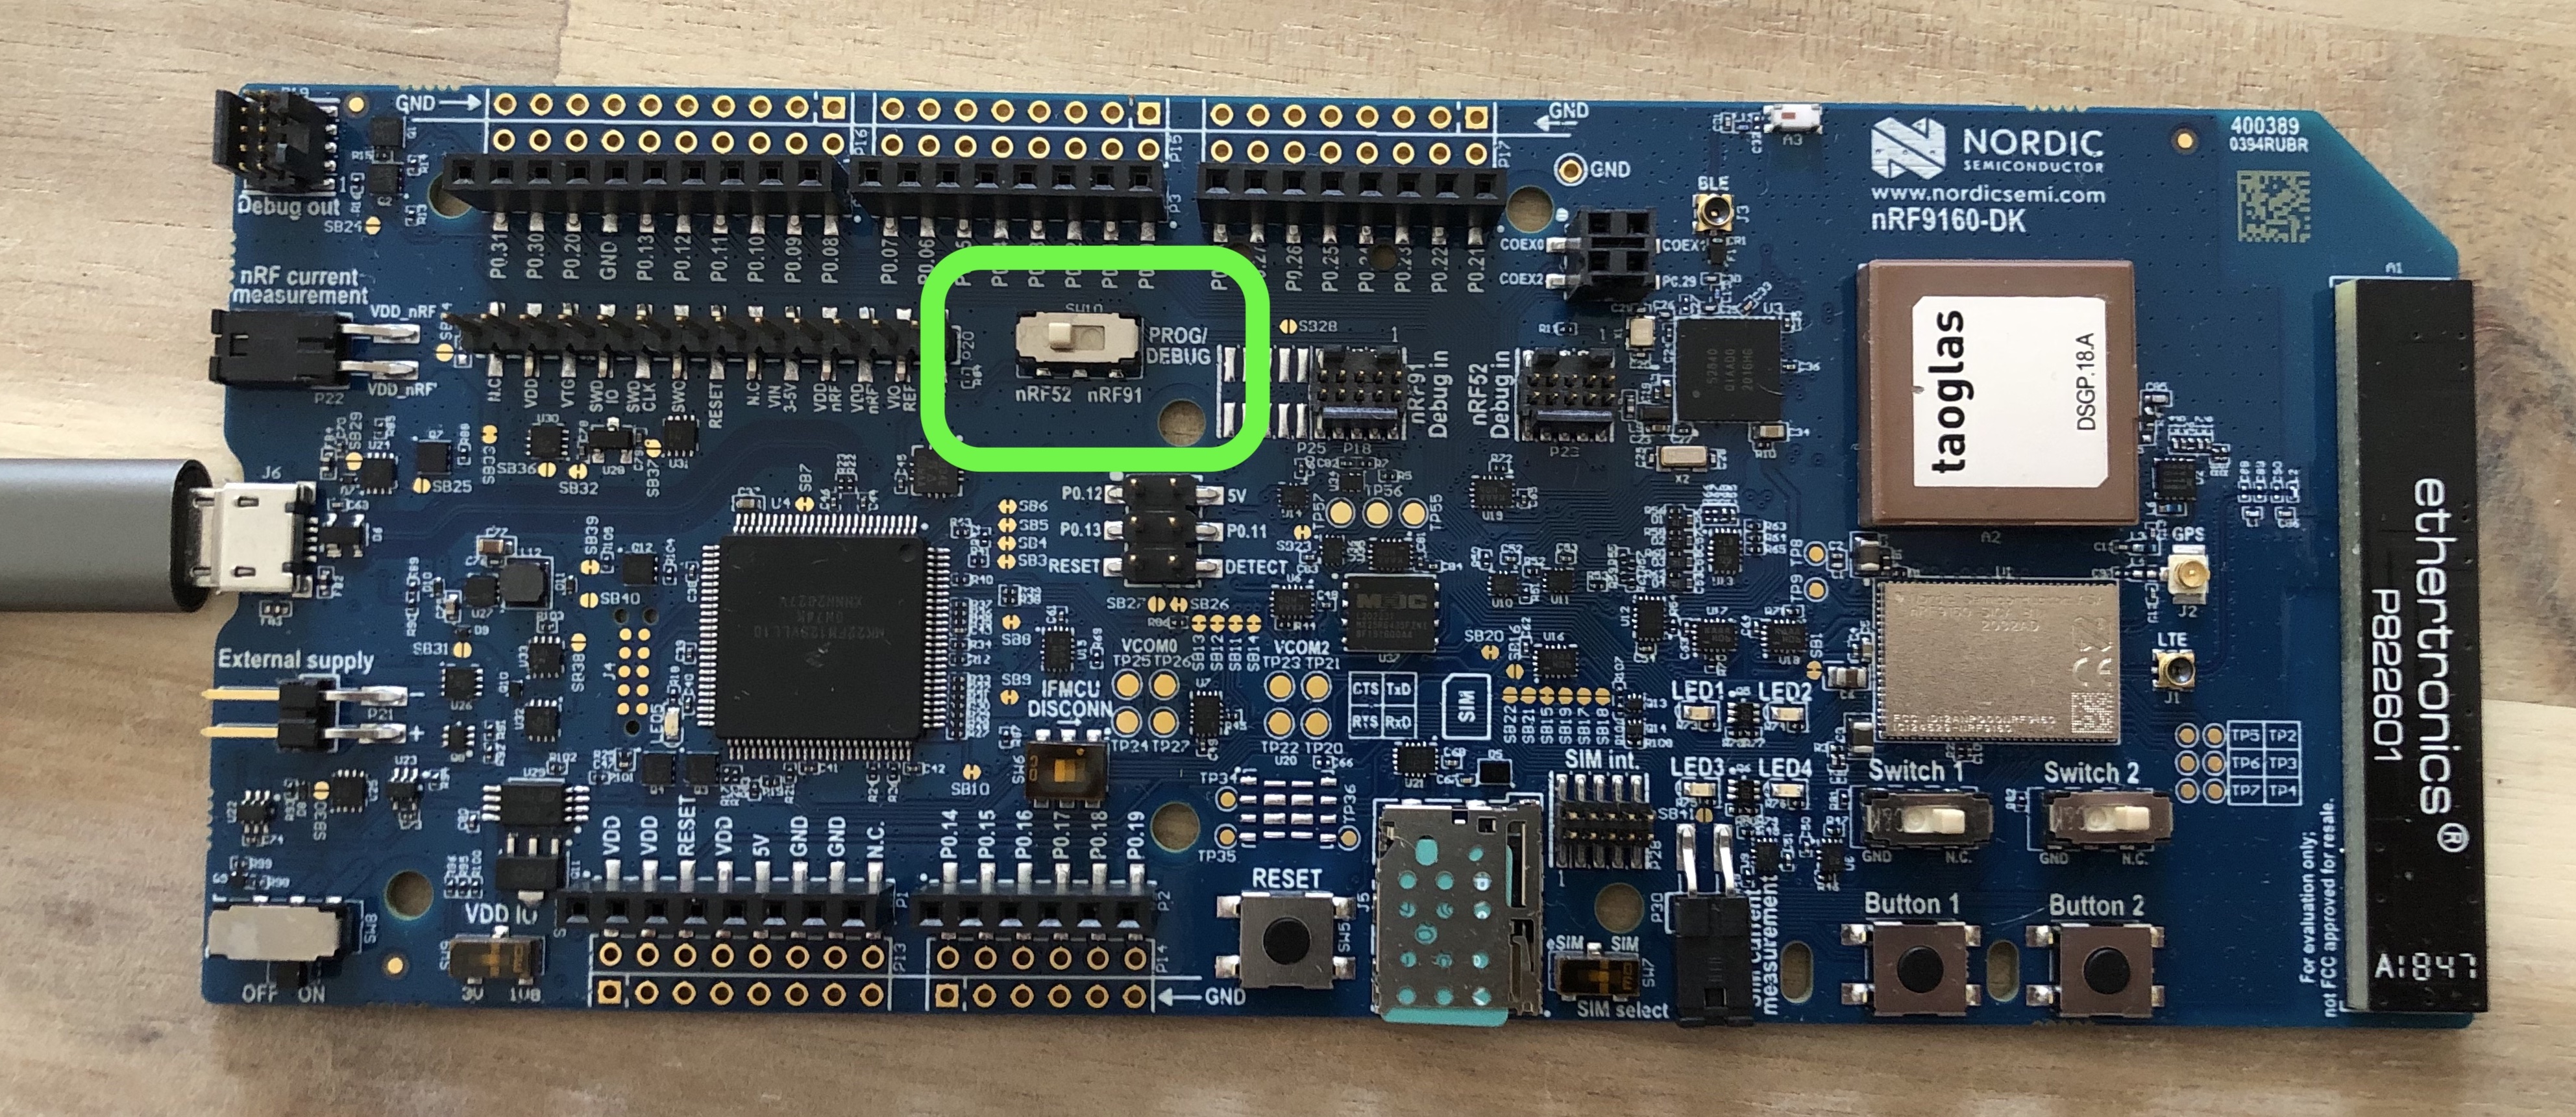 Ensure that the PROG/DEBUG switch is in nRF52 position to flash the board controller.